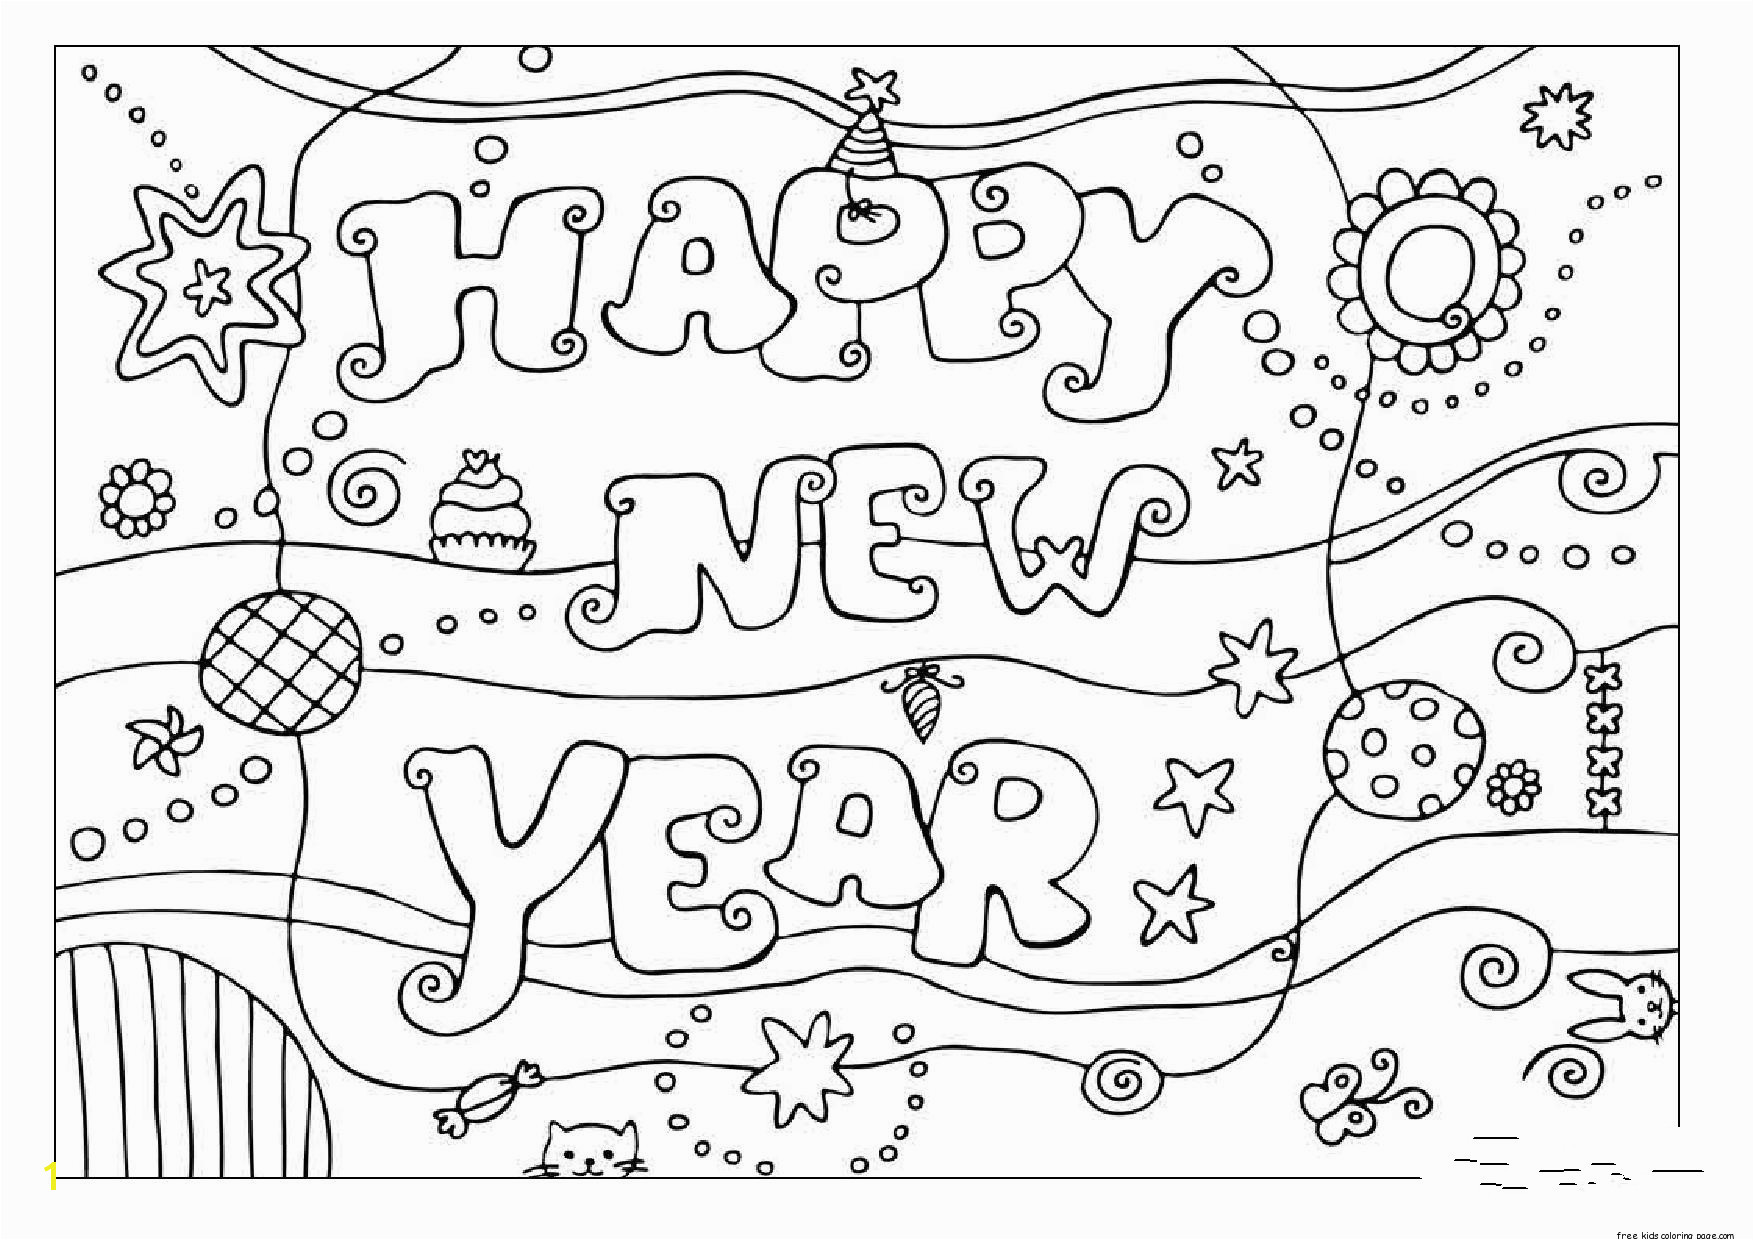 Happy New Year Coloring Pages for toddlers Printable Coloring Pages Happy New Year 2016free Printable